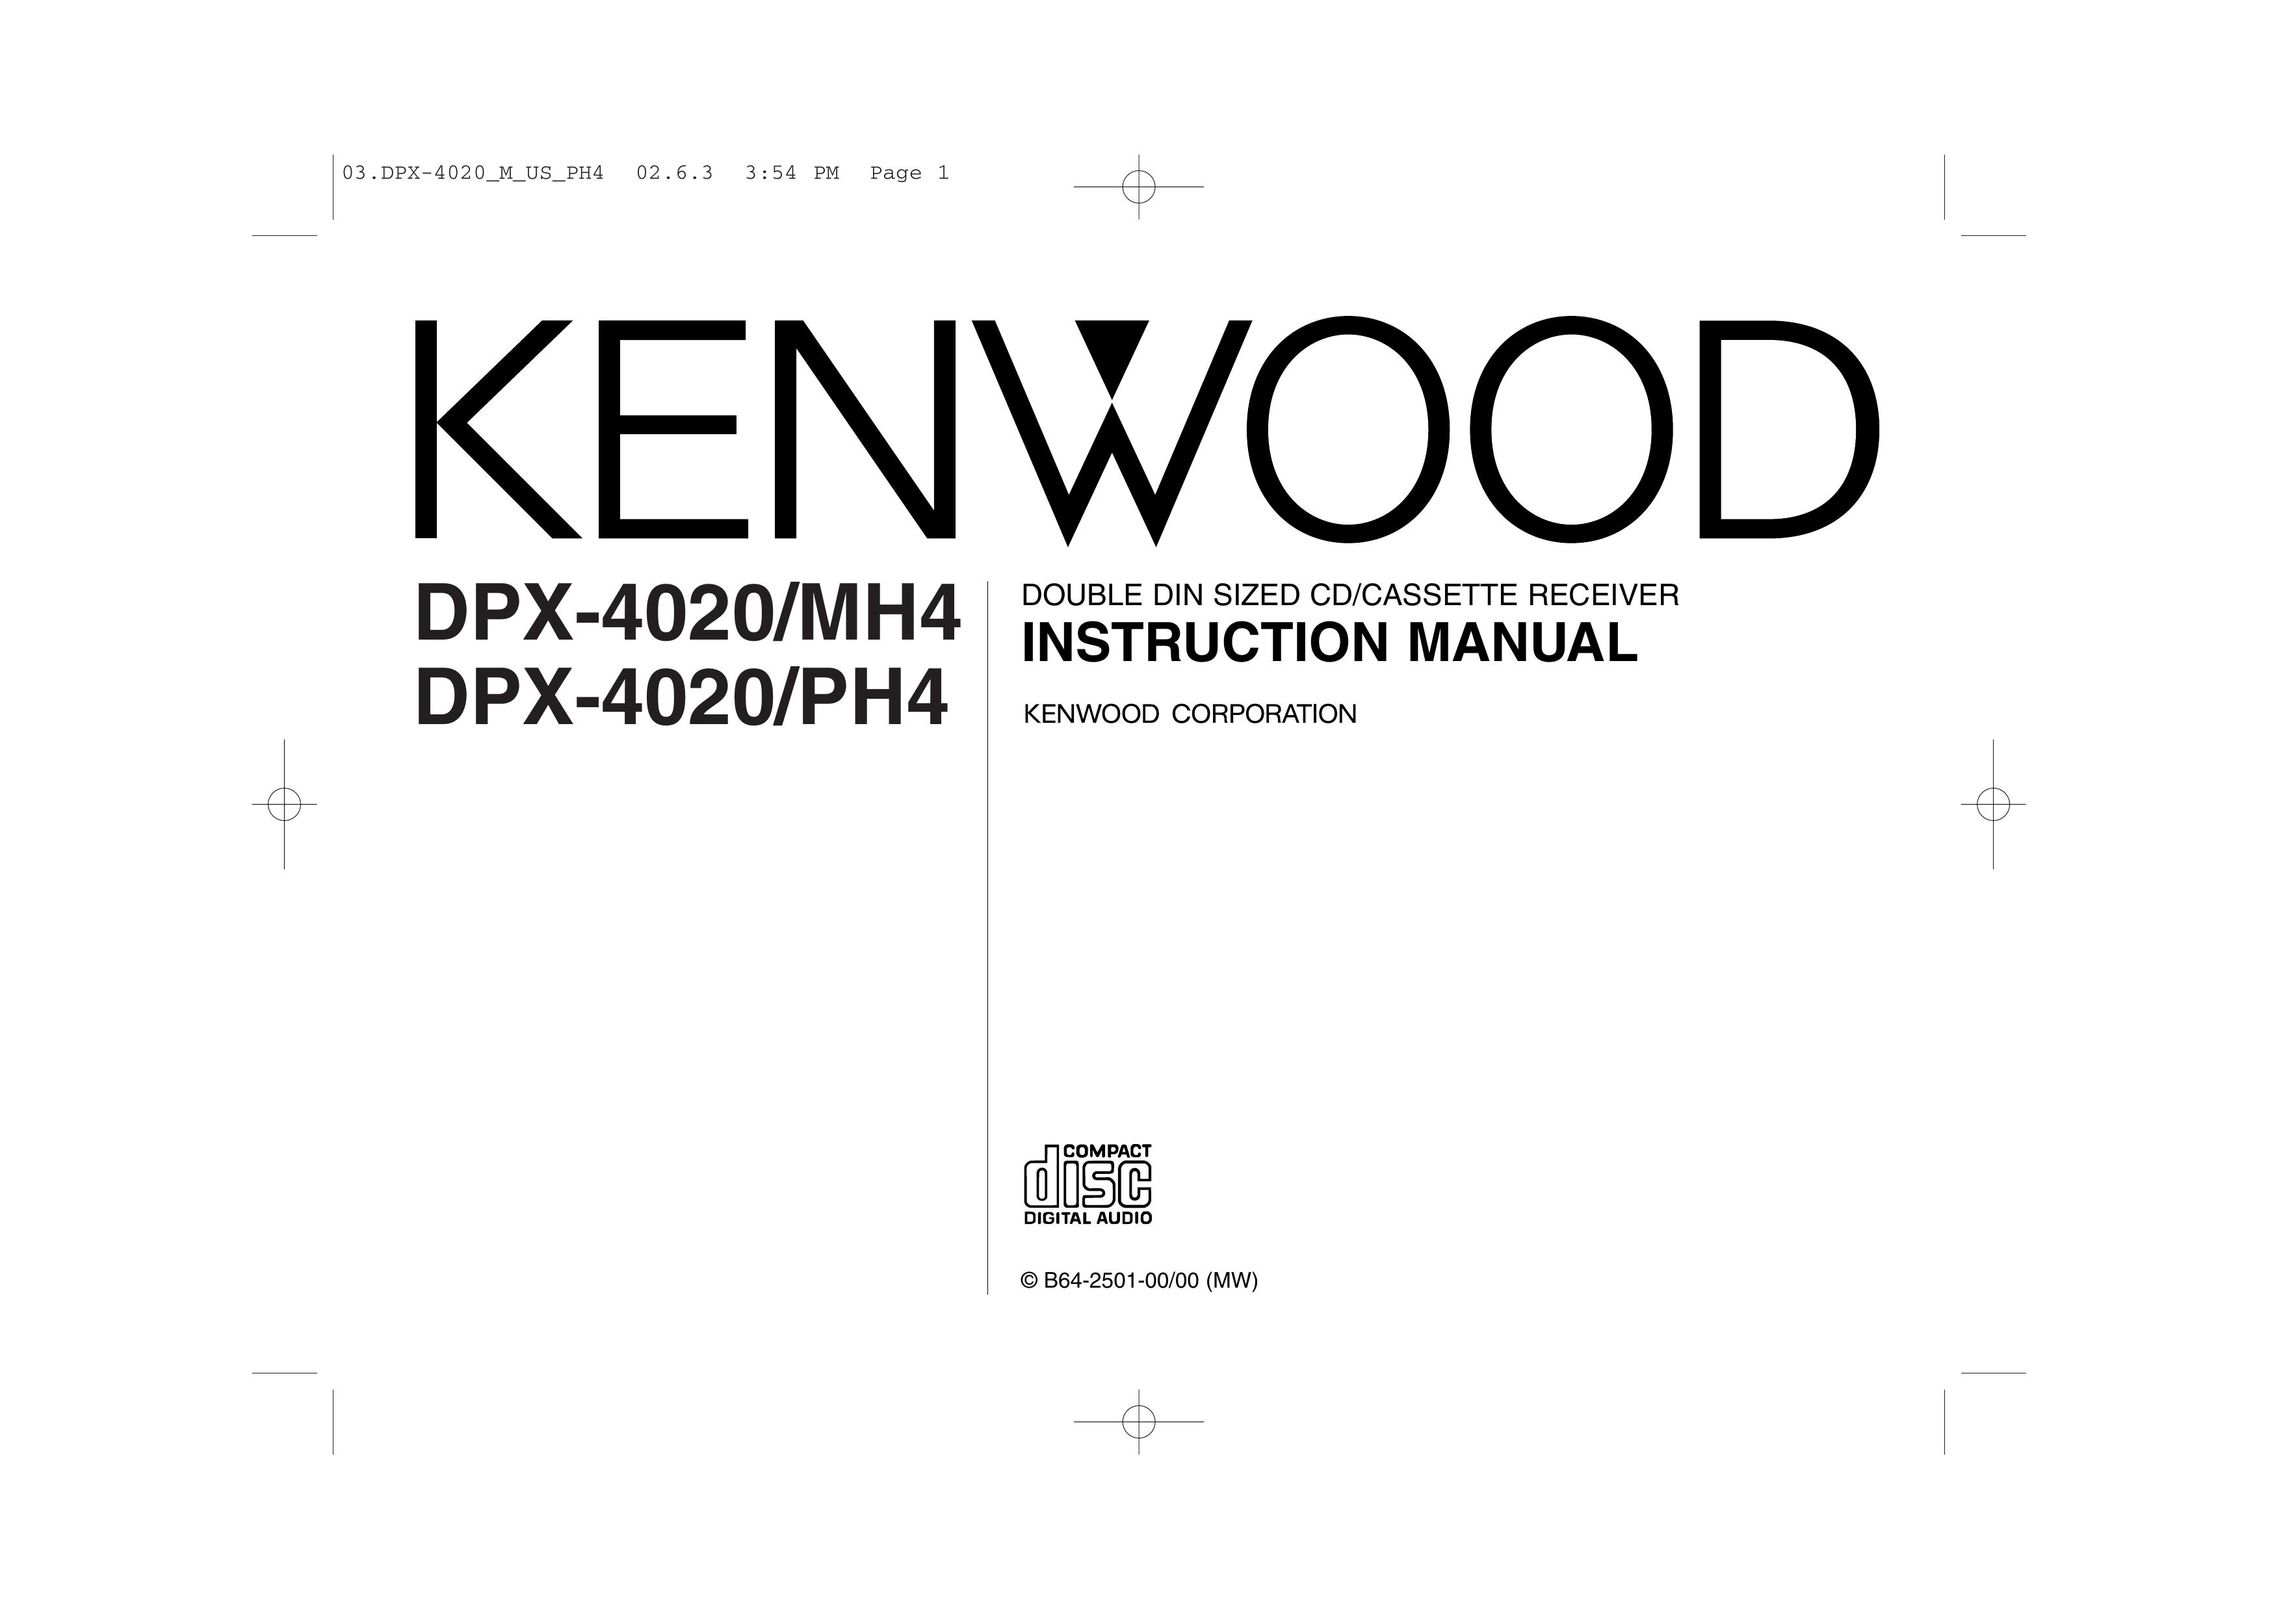 Kenwood DPX-4020MH4 Car Stereo System User Manual